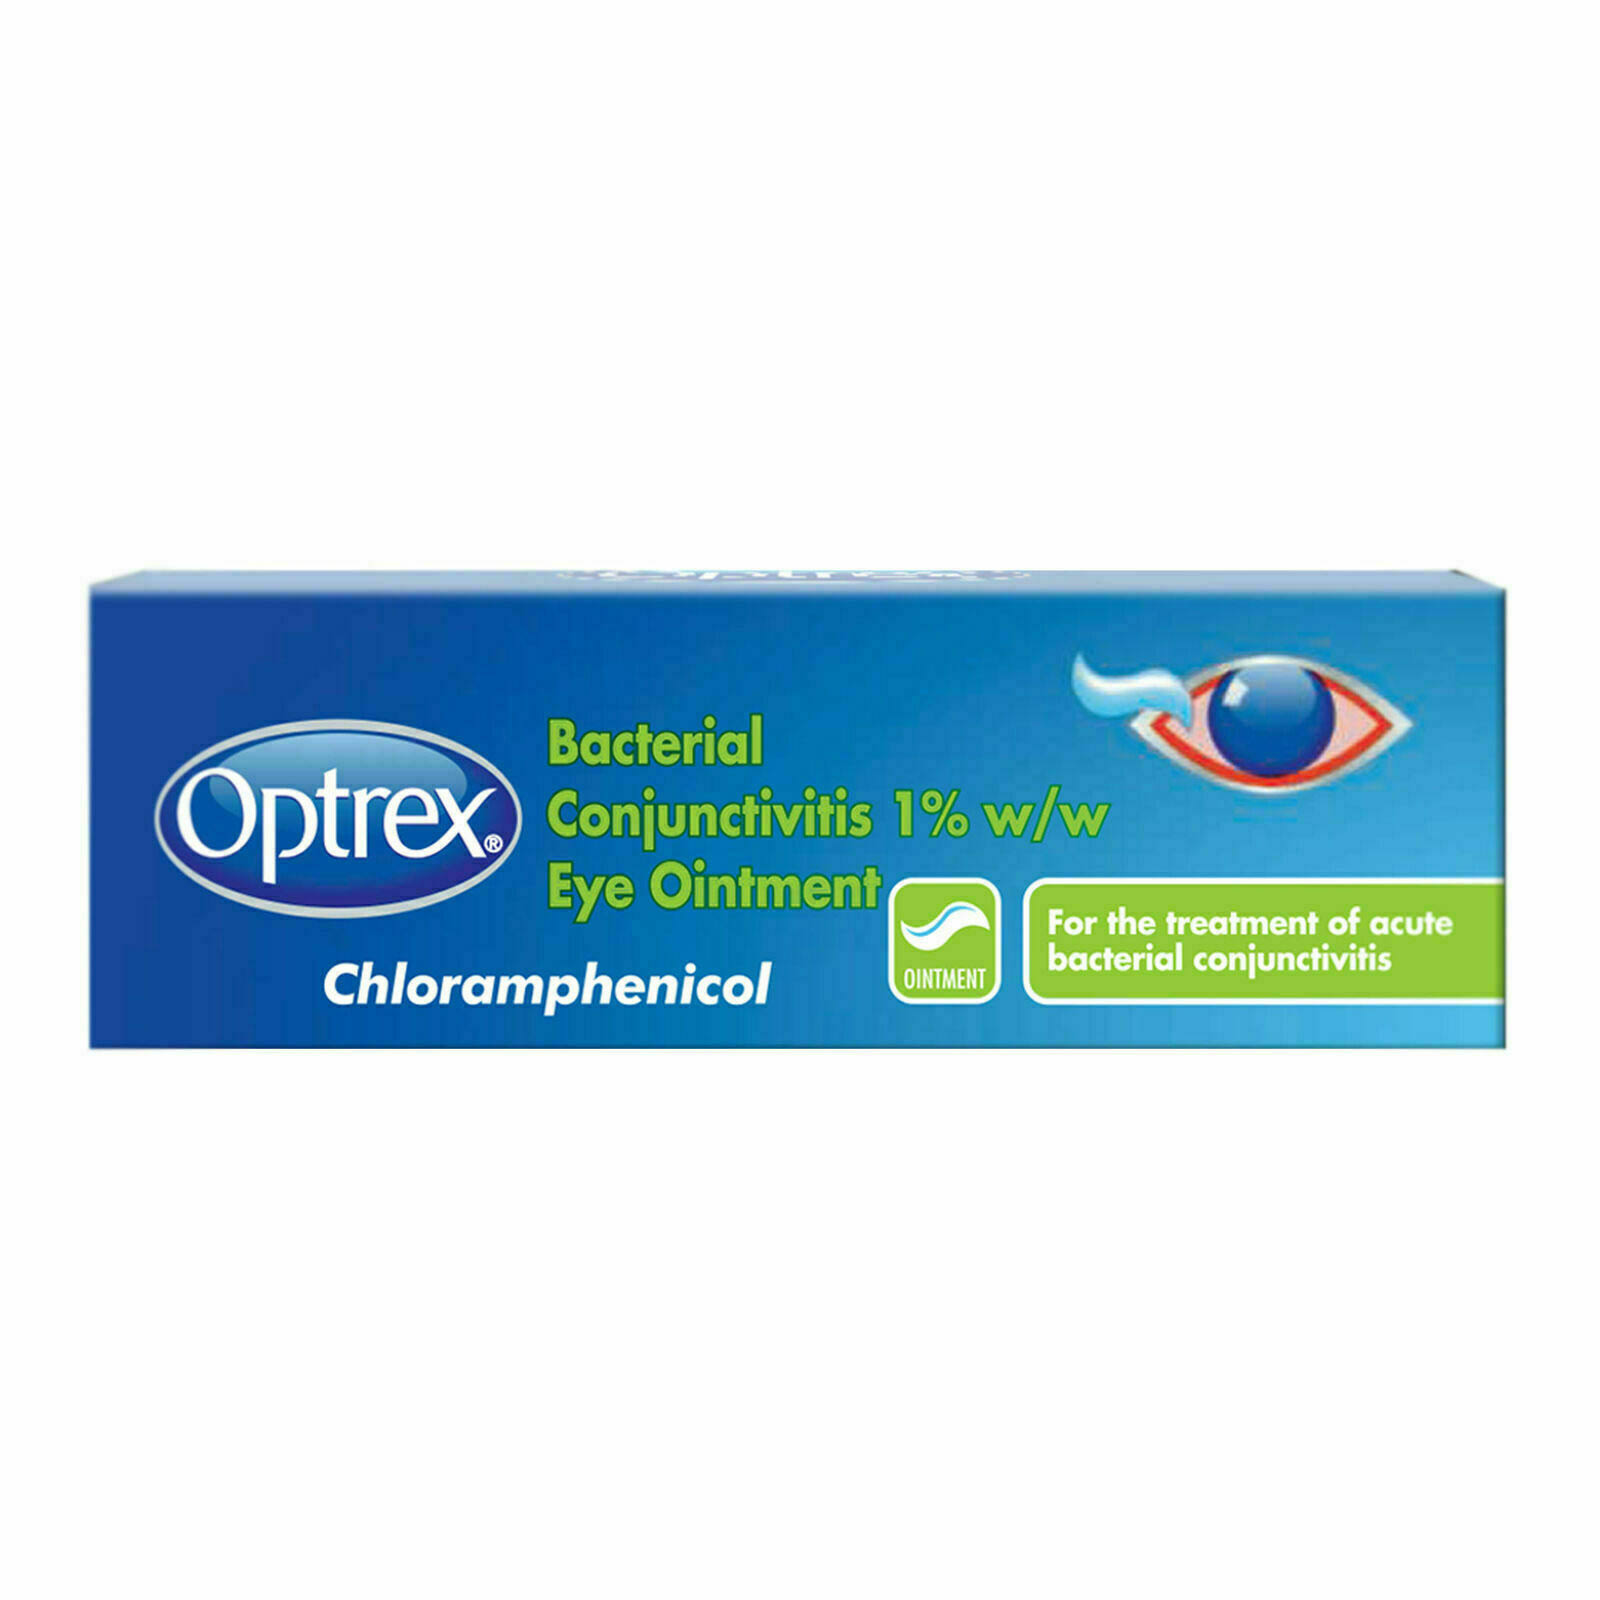 Optrex Bacterial Conjunctivitis Eye Ointment 4g